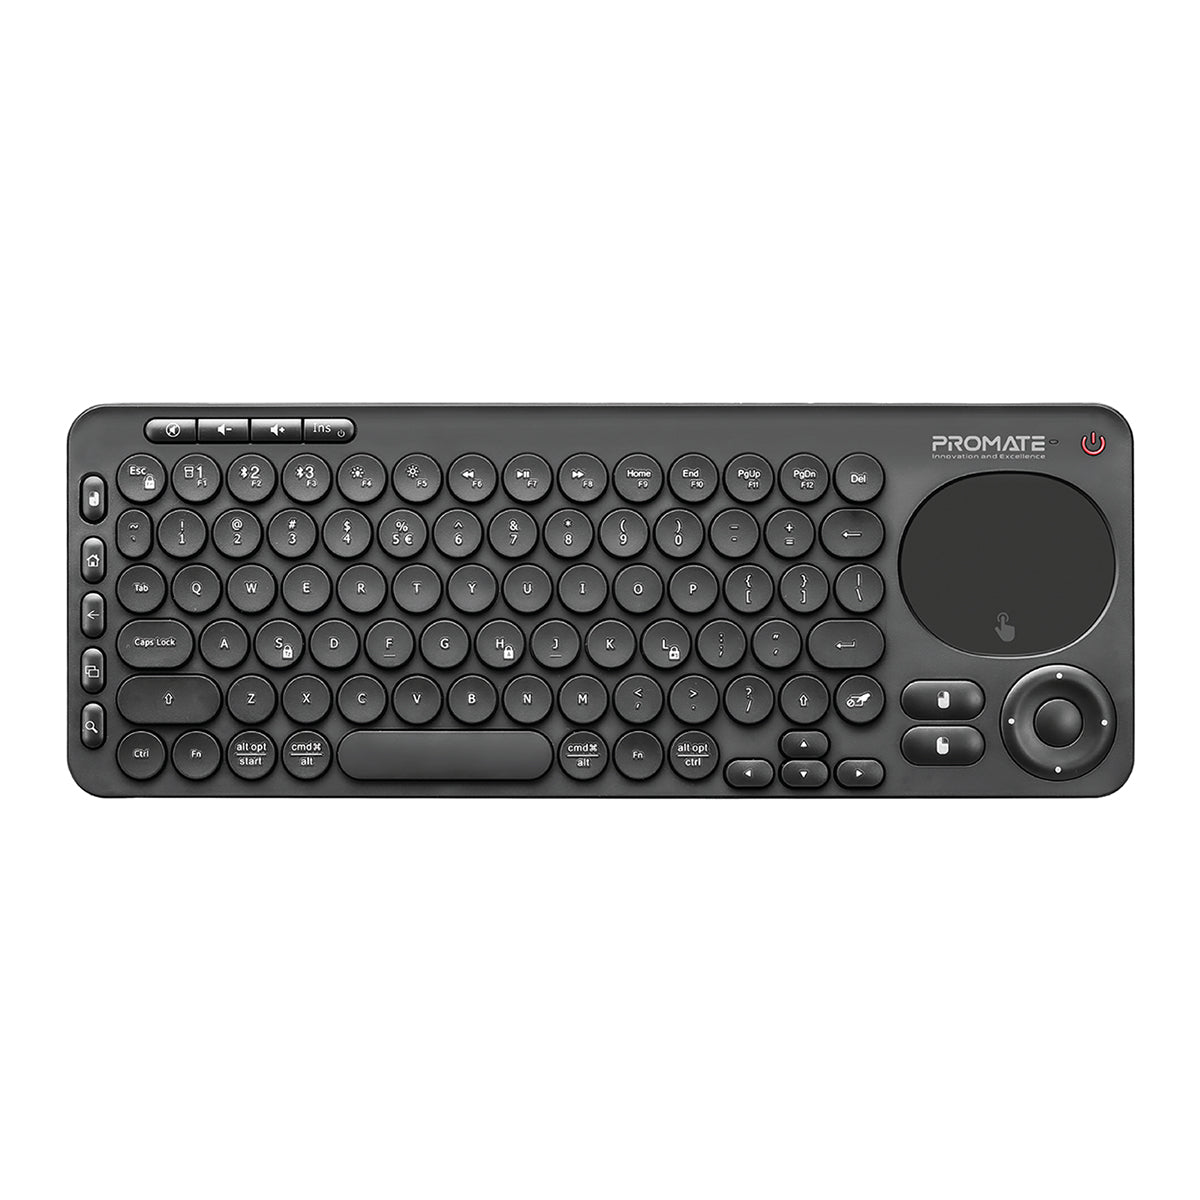 Promate Bluetooth Keyboard with Touchpad, All-In-One 2.4Ghz Wireless/Bluetooth v5.0 Multimedia Keyboard with Built-In Touchpad Mouse, Precision Tracking, Multi-Device Pairing and IR TV Remote Controller, KeyPad-1 Arabic / English